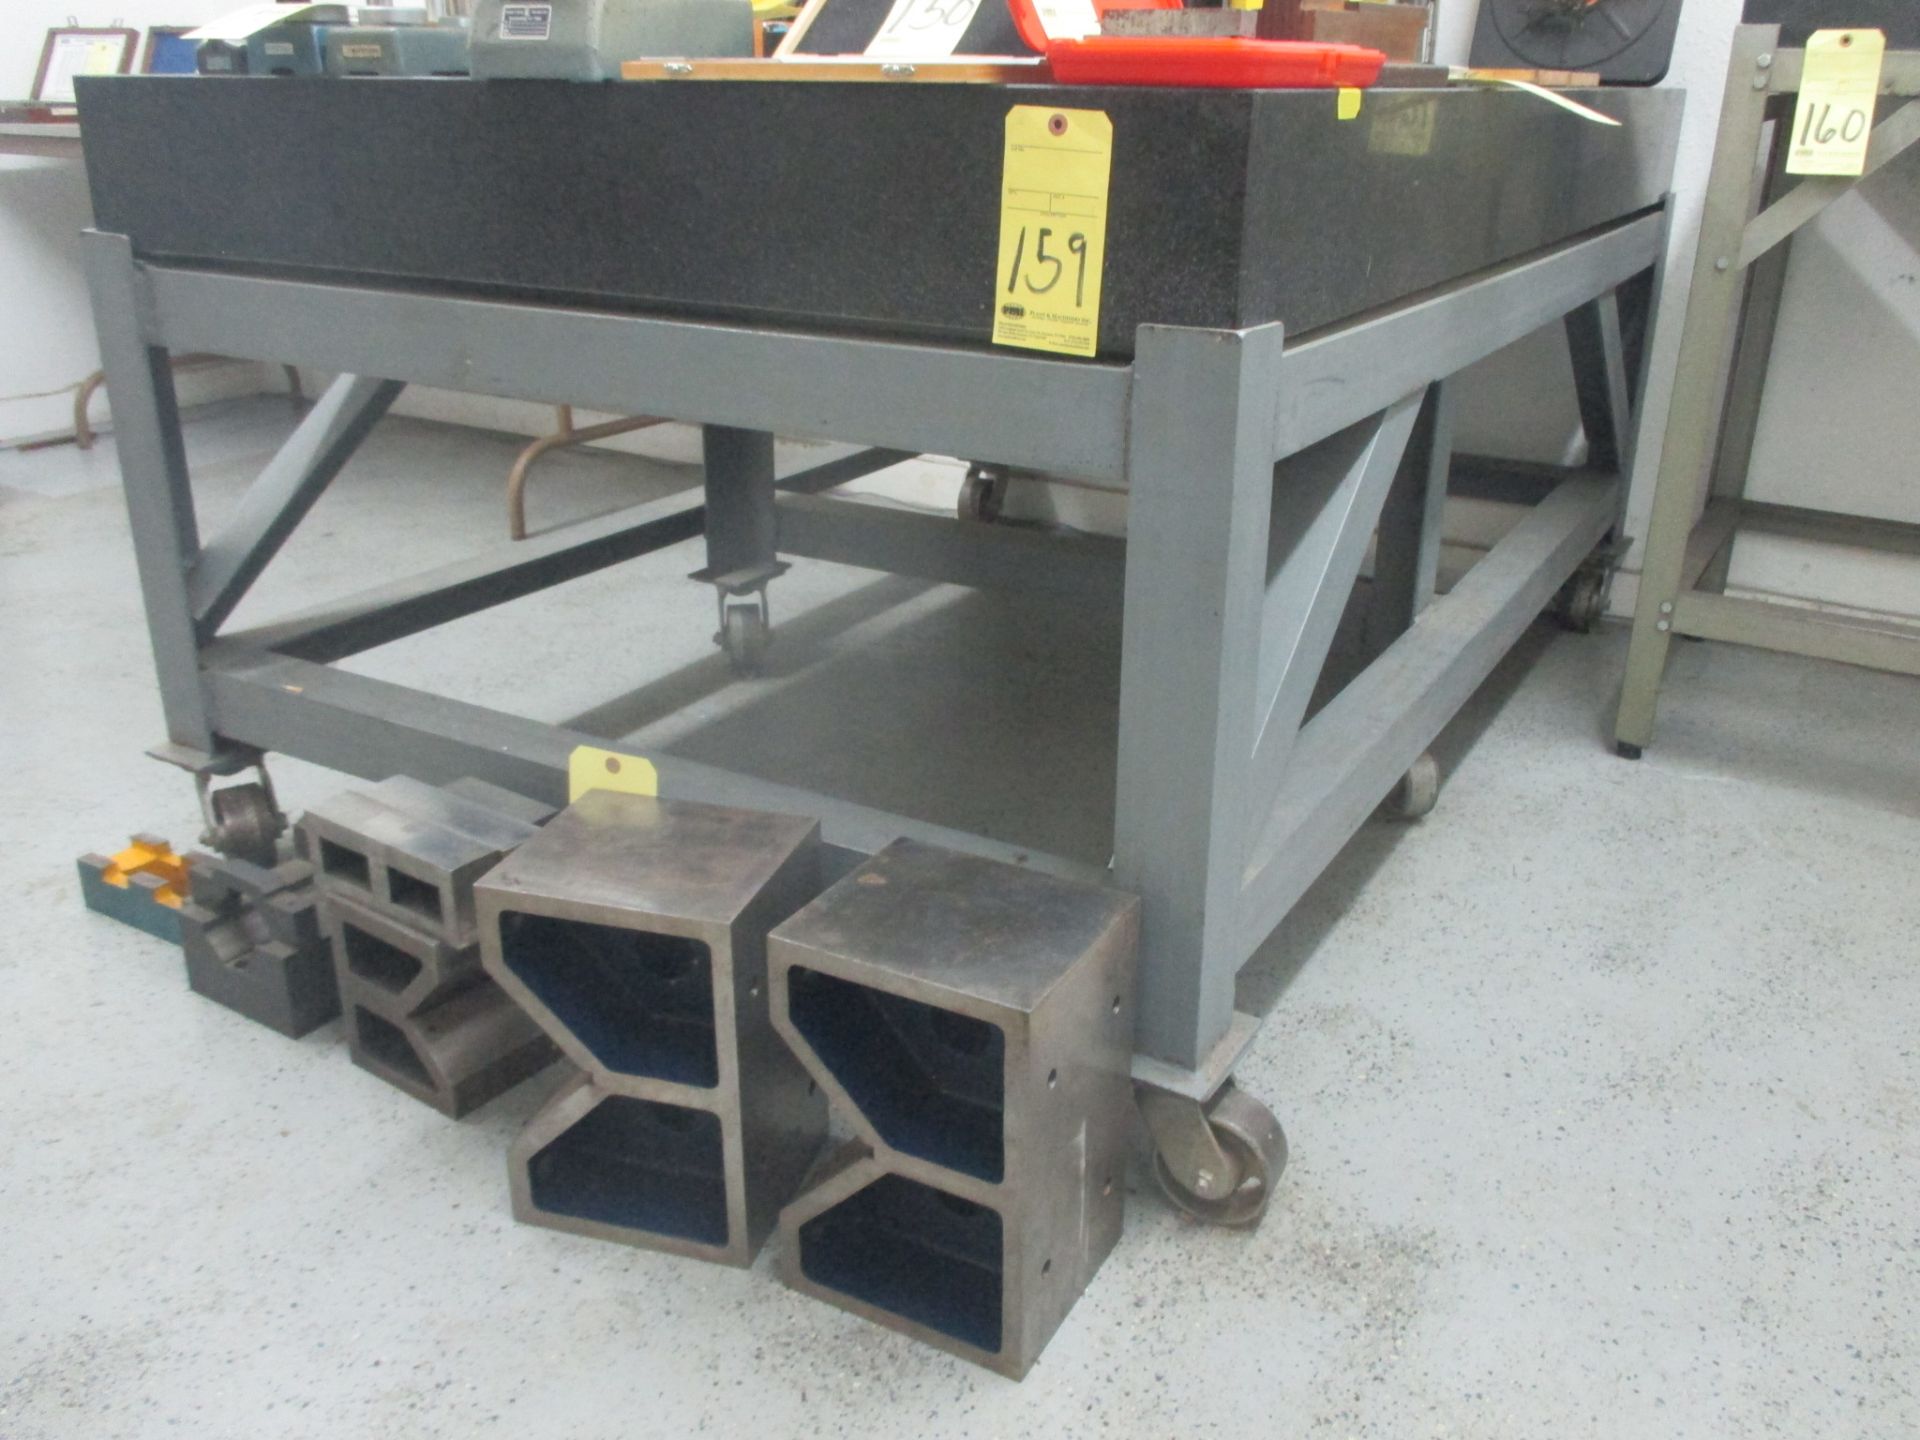 GRANITE SURFACE PLATE, 48” x 72” x 6-3/4” thk., Grade A, on H.D. roller stand (delayed removal until